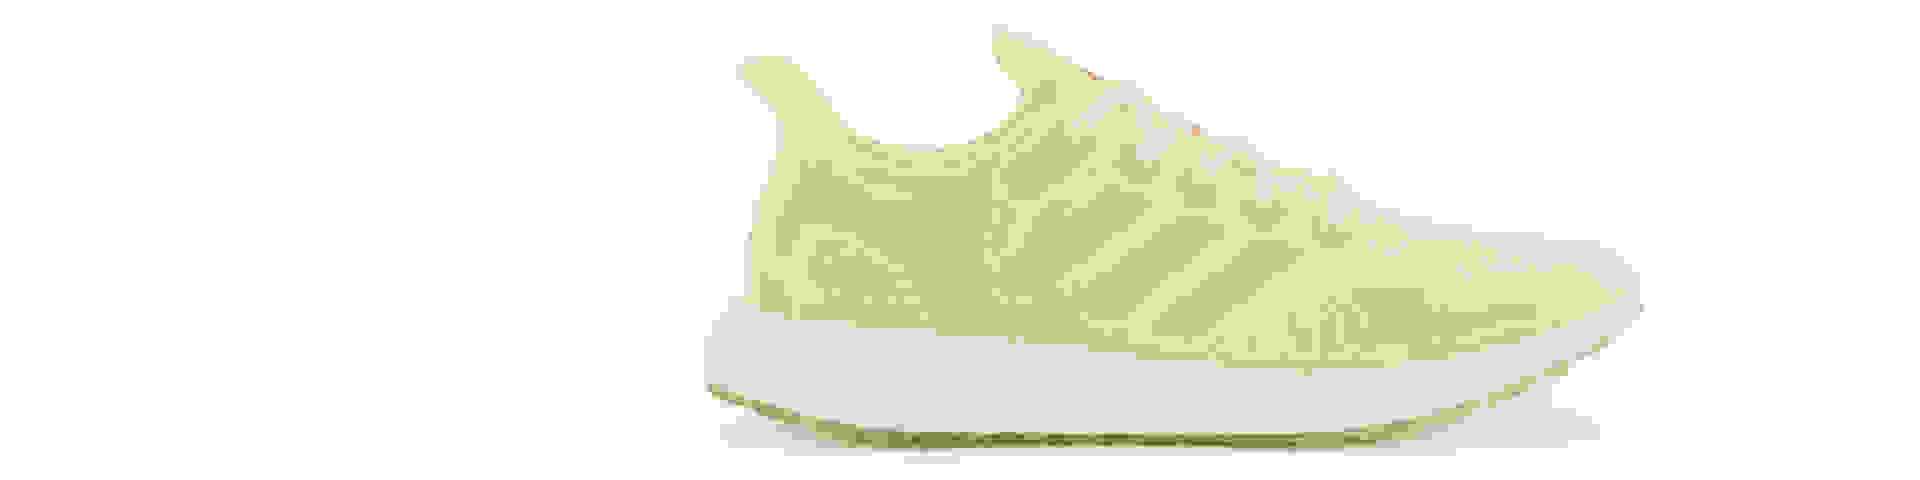 An image of the Futurecraft Loop shoe